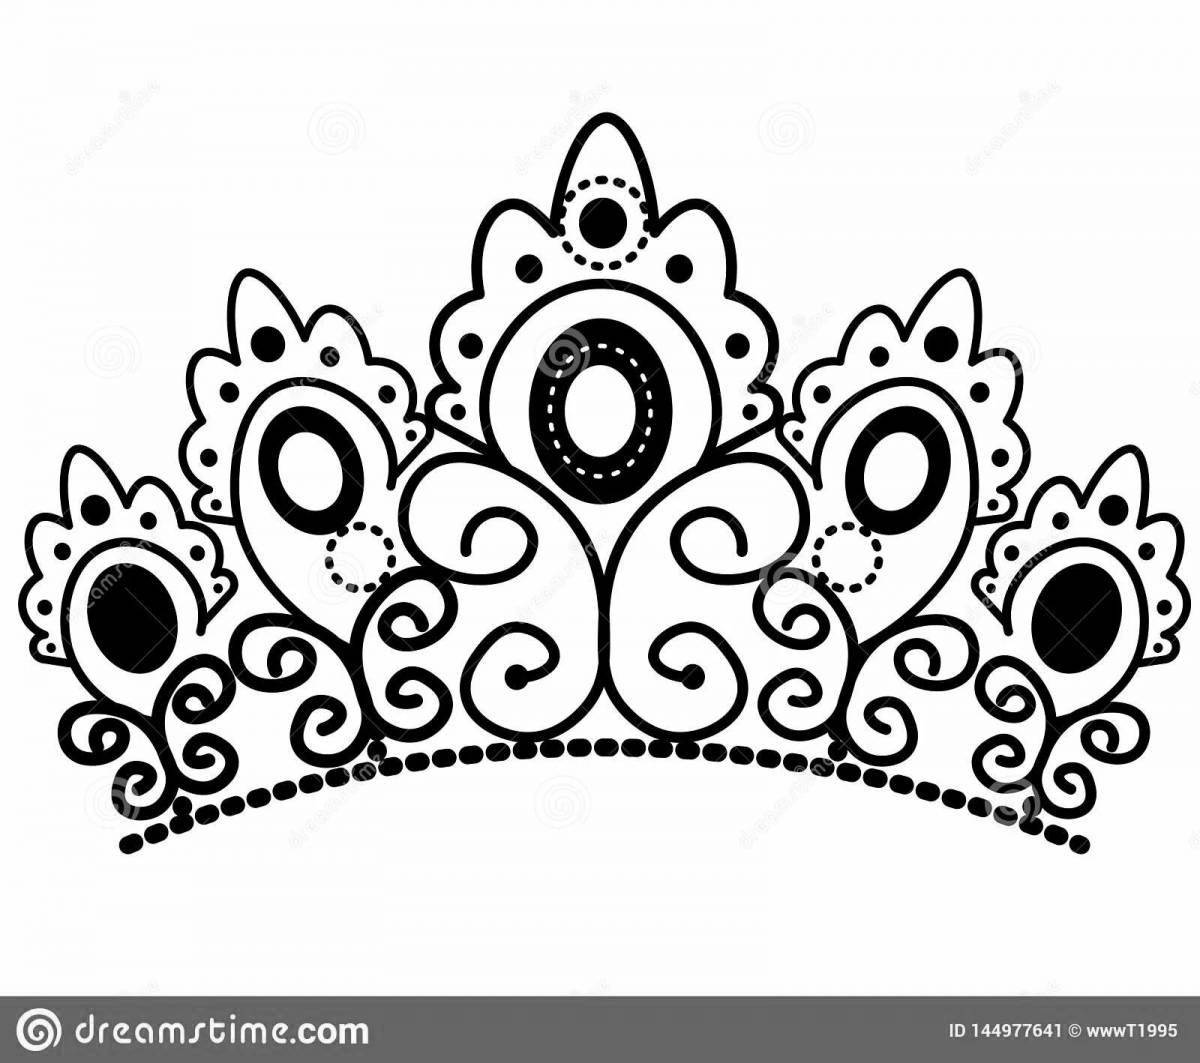 Exalted diadem coloring page